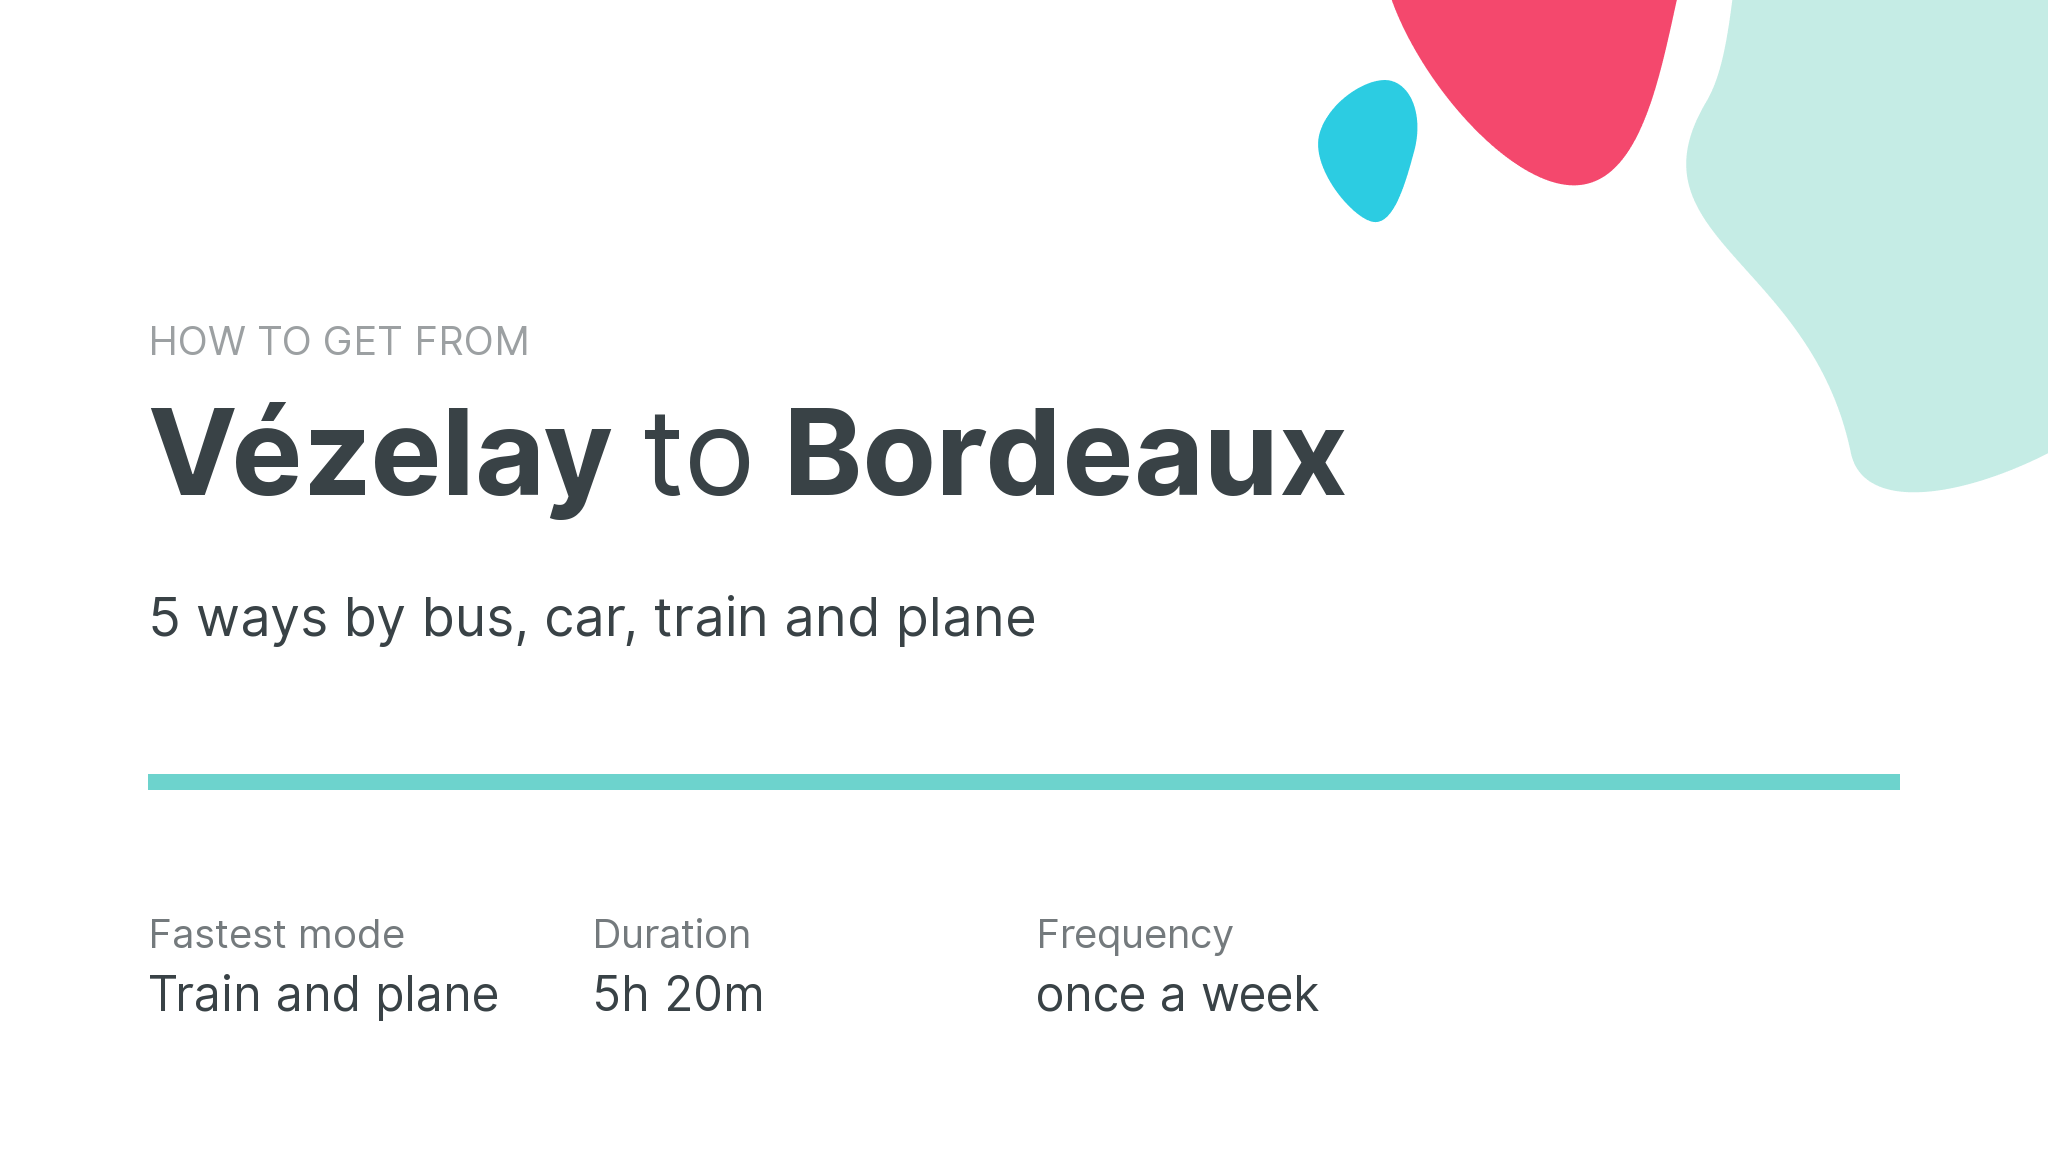 How do I get from Vézelay to Bordeaux